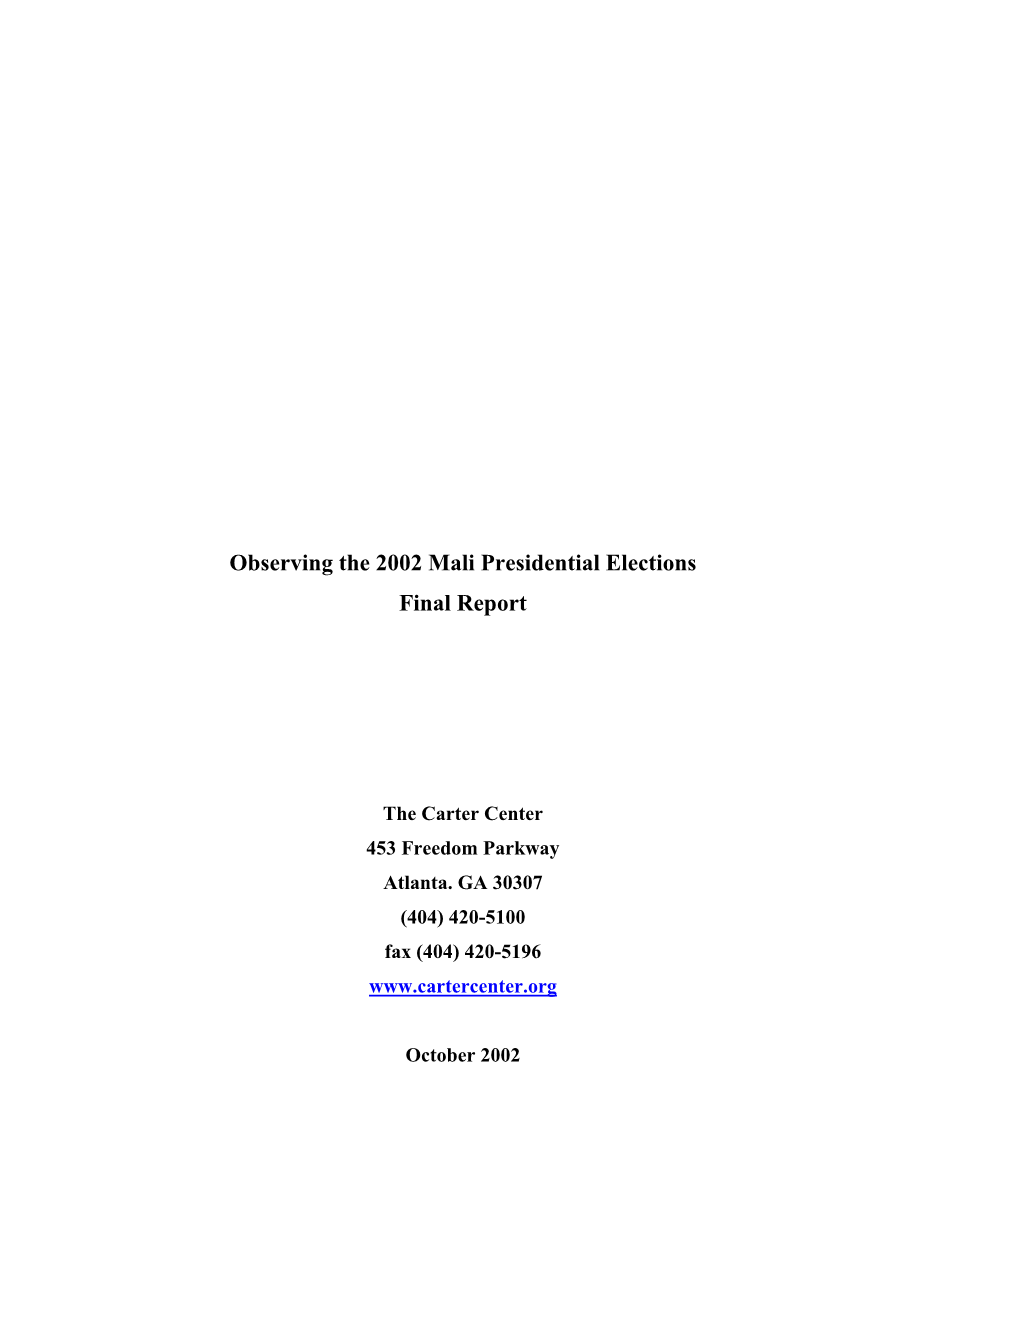 Observing the 2002 Mali Presidential Elections: Final Report